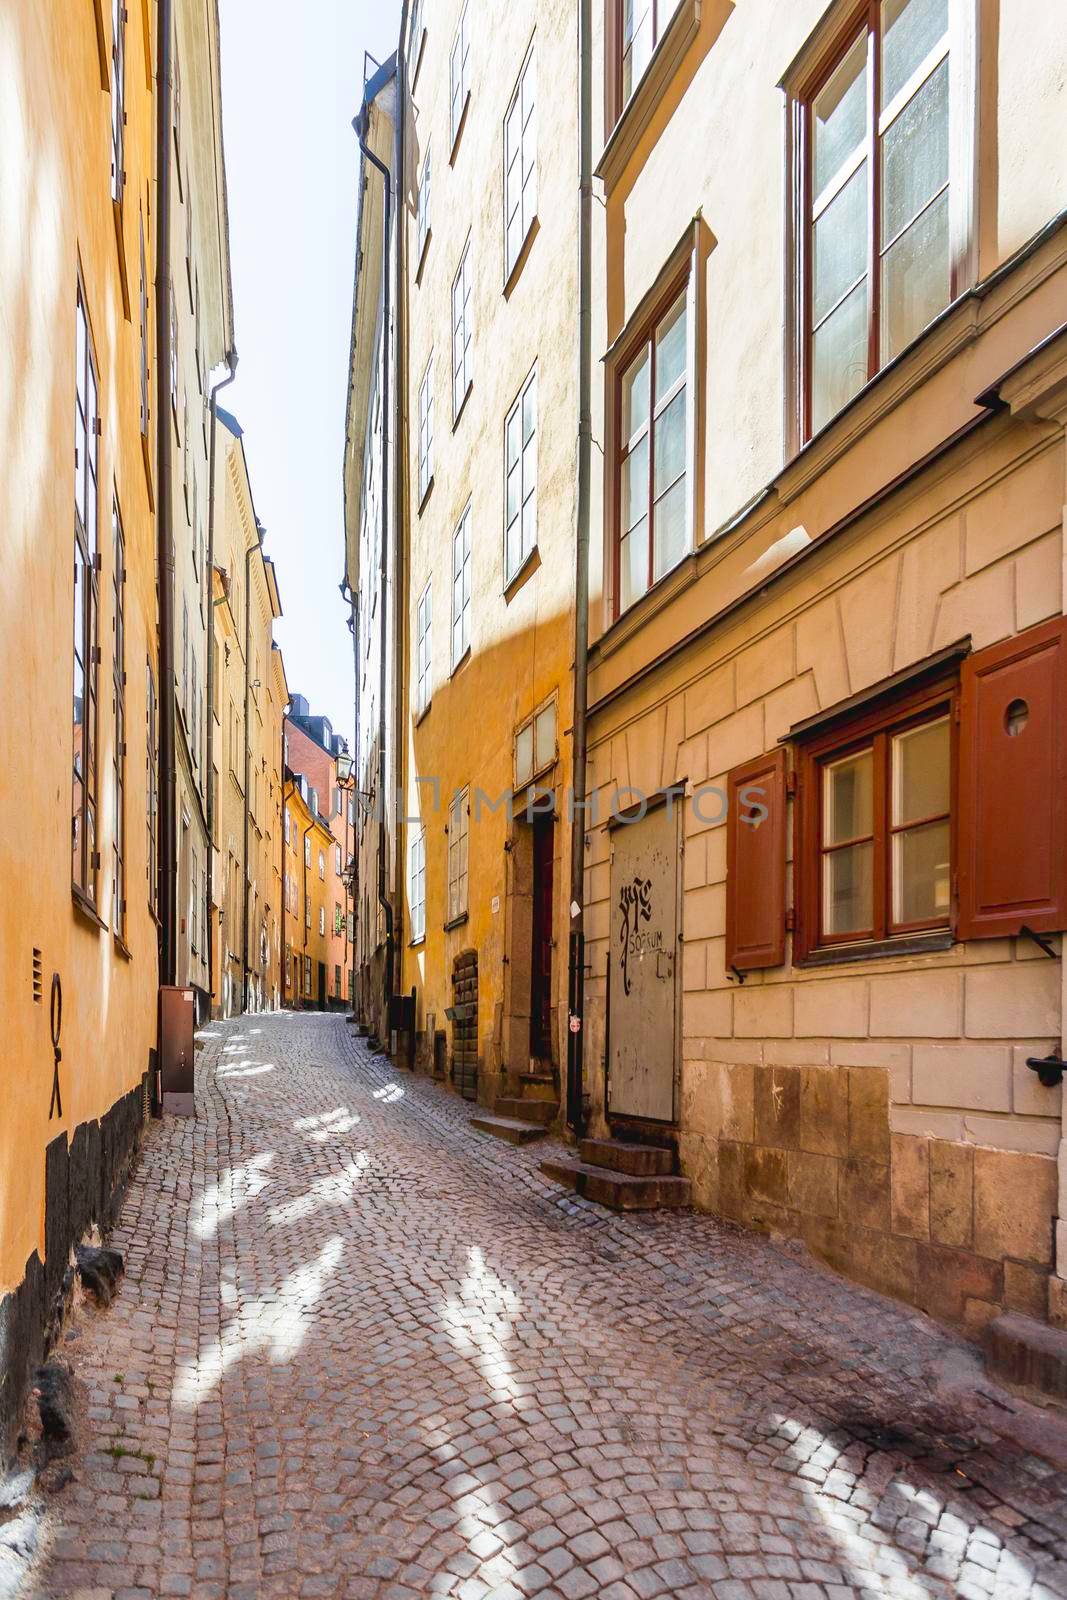 STOCKHOLM, SWEDEN - July 06, 2017. Narrow streets in historic part of town. Old fashioned buildings in Gamla stan. by aksenovko